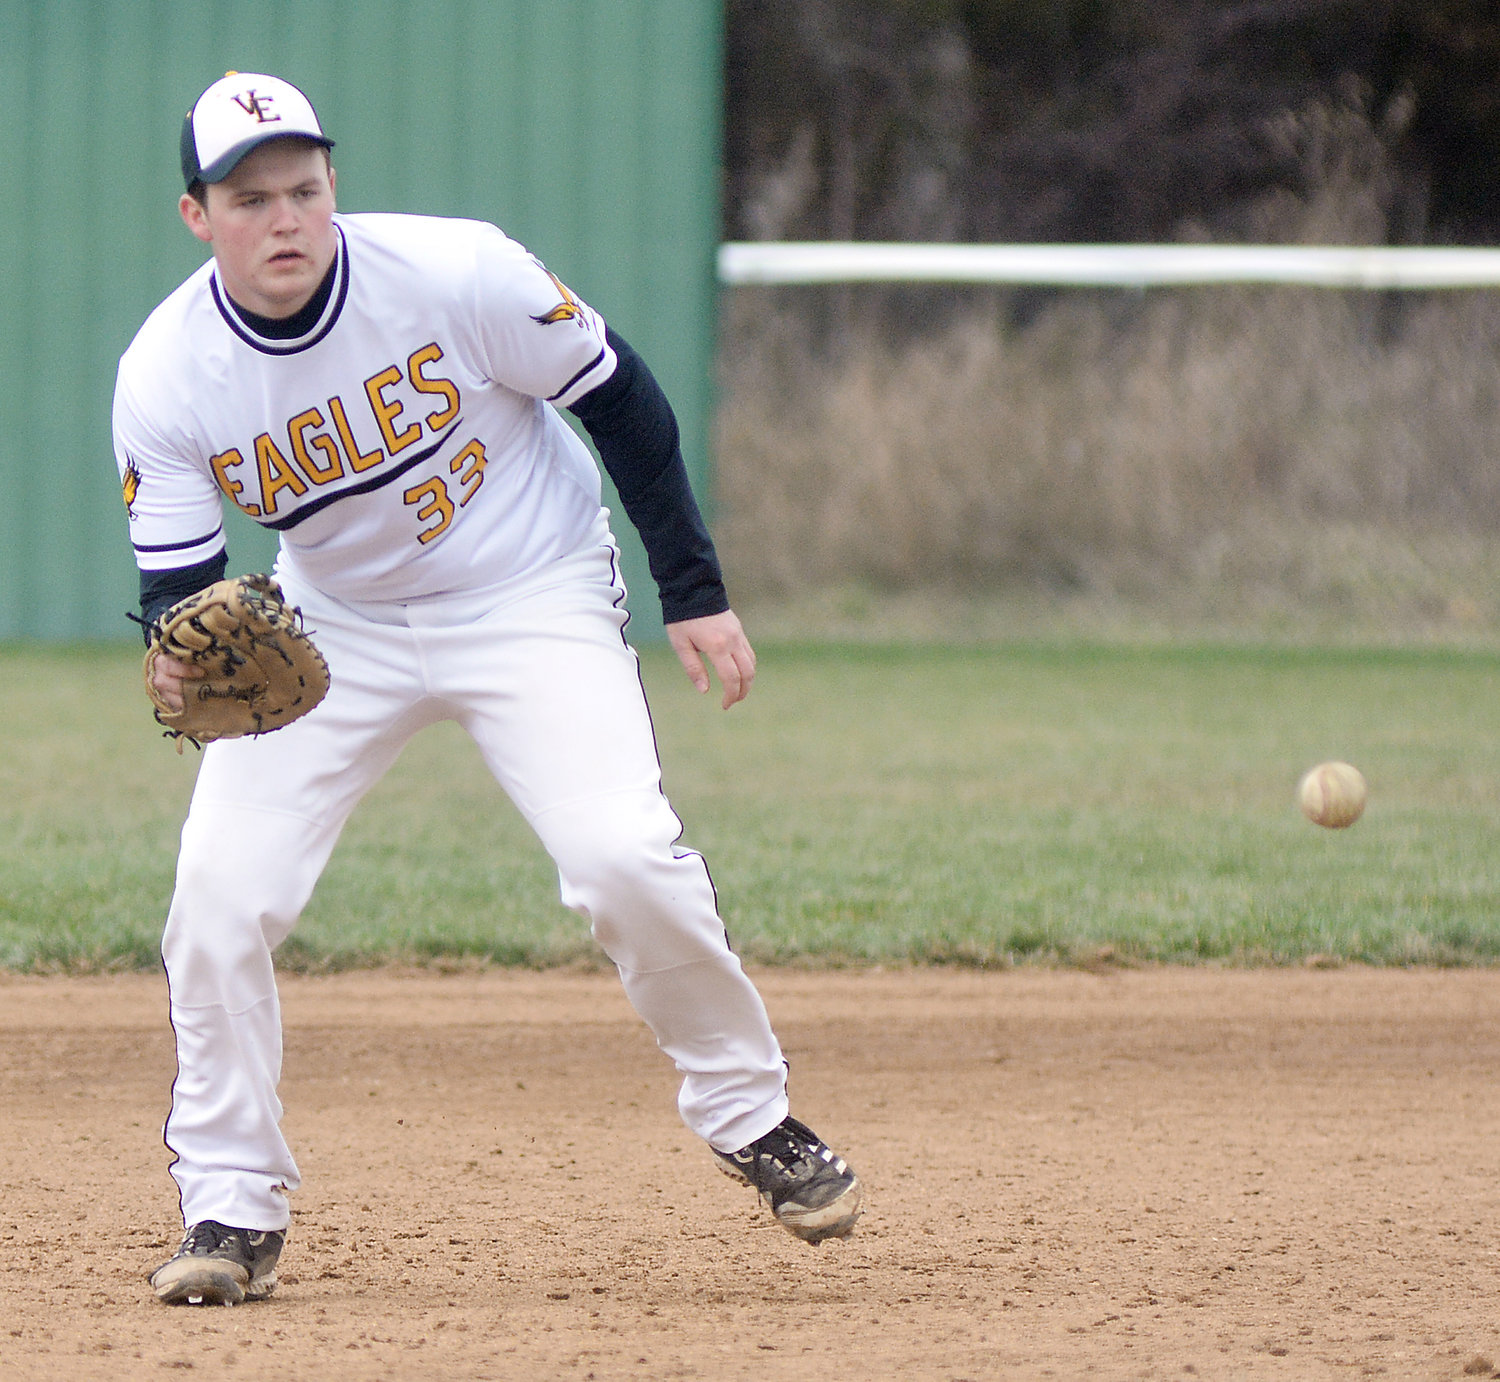 Landon Kloeppel watches a ground ball into his glove during infield warm up from earlier in the season at the Stoutland Tournament. Vienna is scheduled to play a doubleheader today (Wednesday) against Cuba at 4:30 p.m., and Missouri Military Academy (MMA) at 6:30 p.m. Senior night will be held between the two games at Vienna City Park.